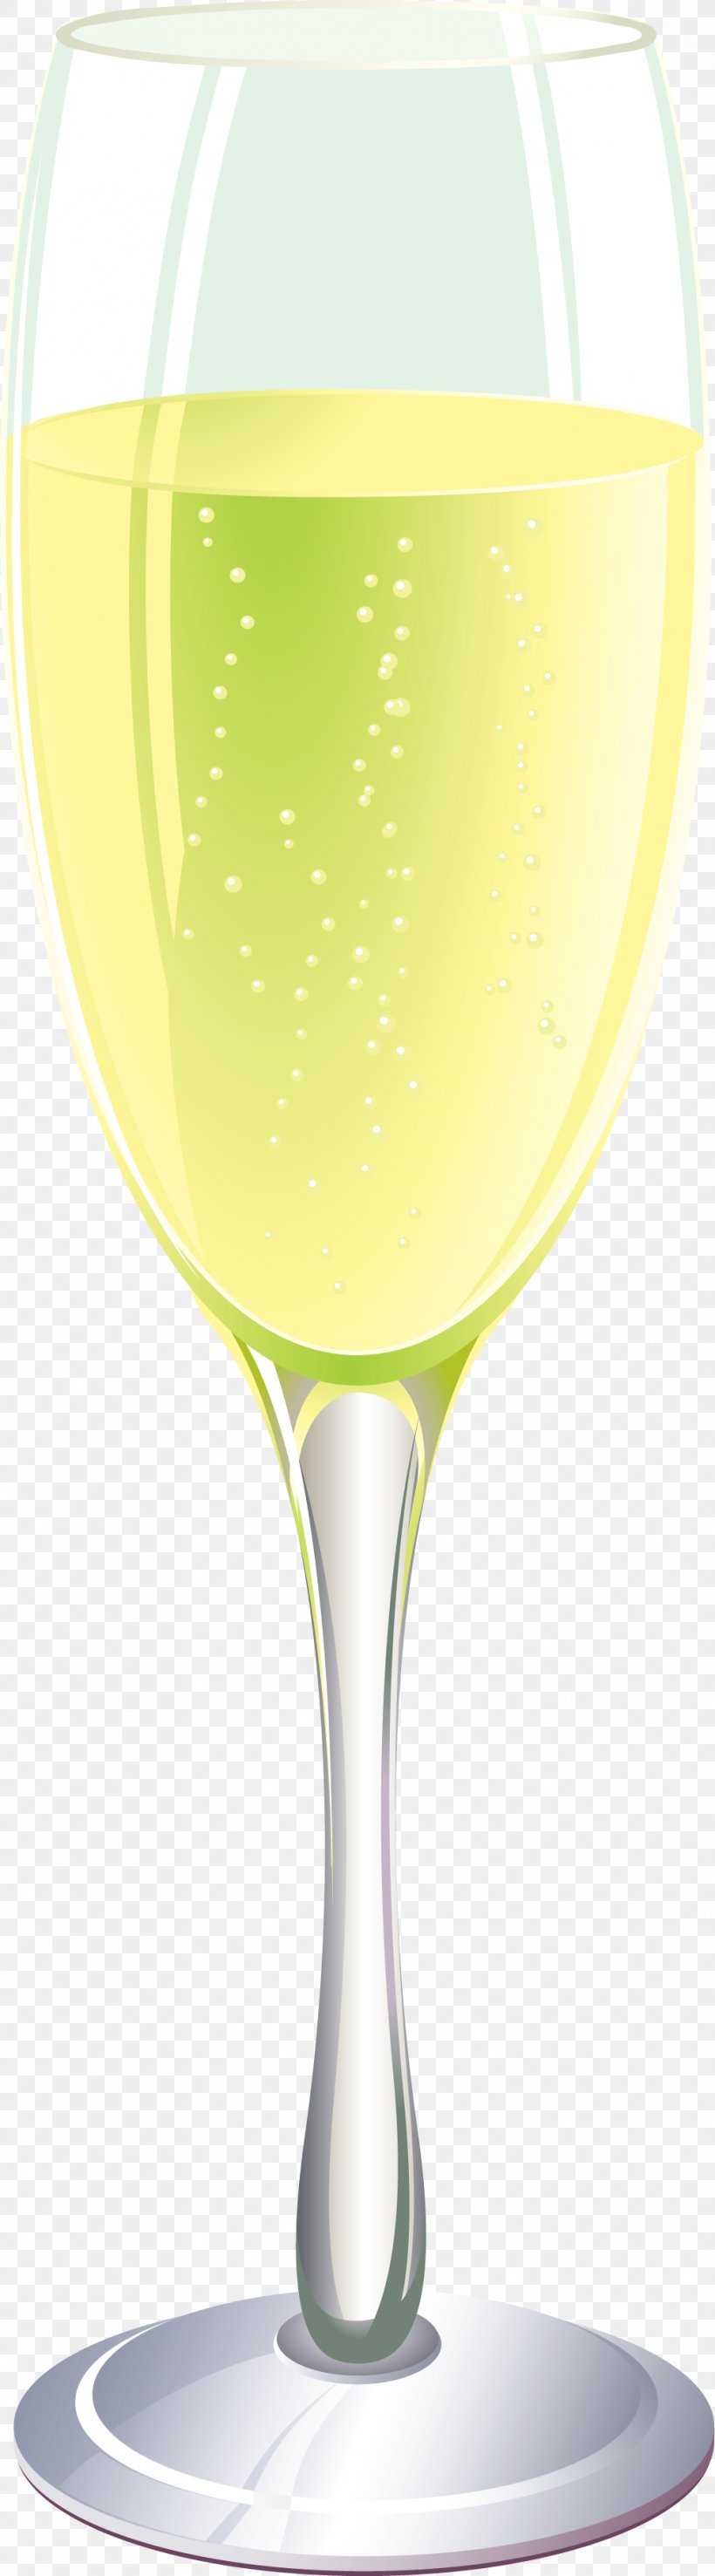 White Wine Wine Glass Cocktail Champagne Beer, PNG, 1009x3636px, Cocktail, Beer Glass, Beer Glasses, Bottle, Chalice Download Free